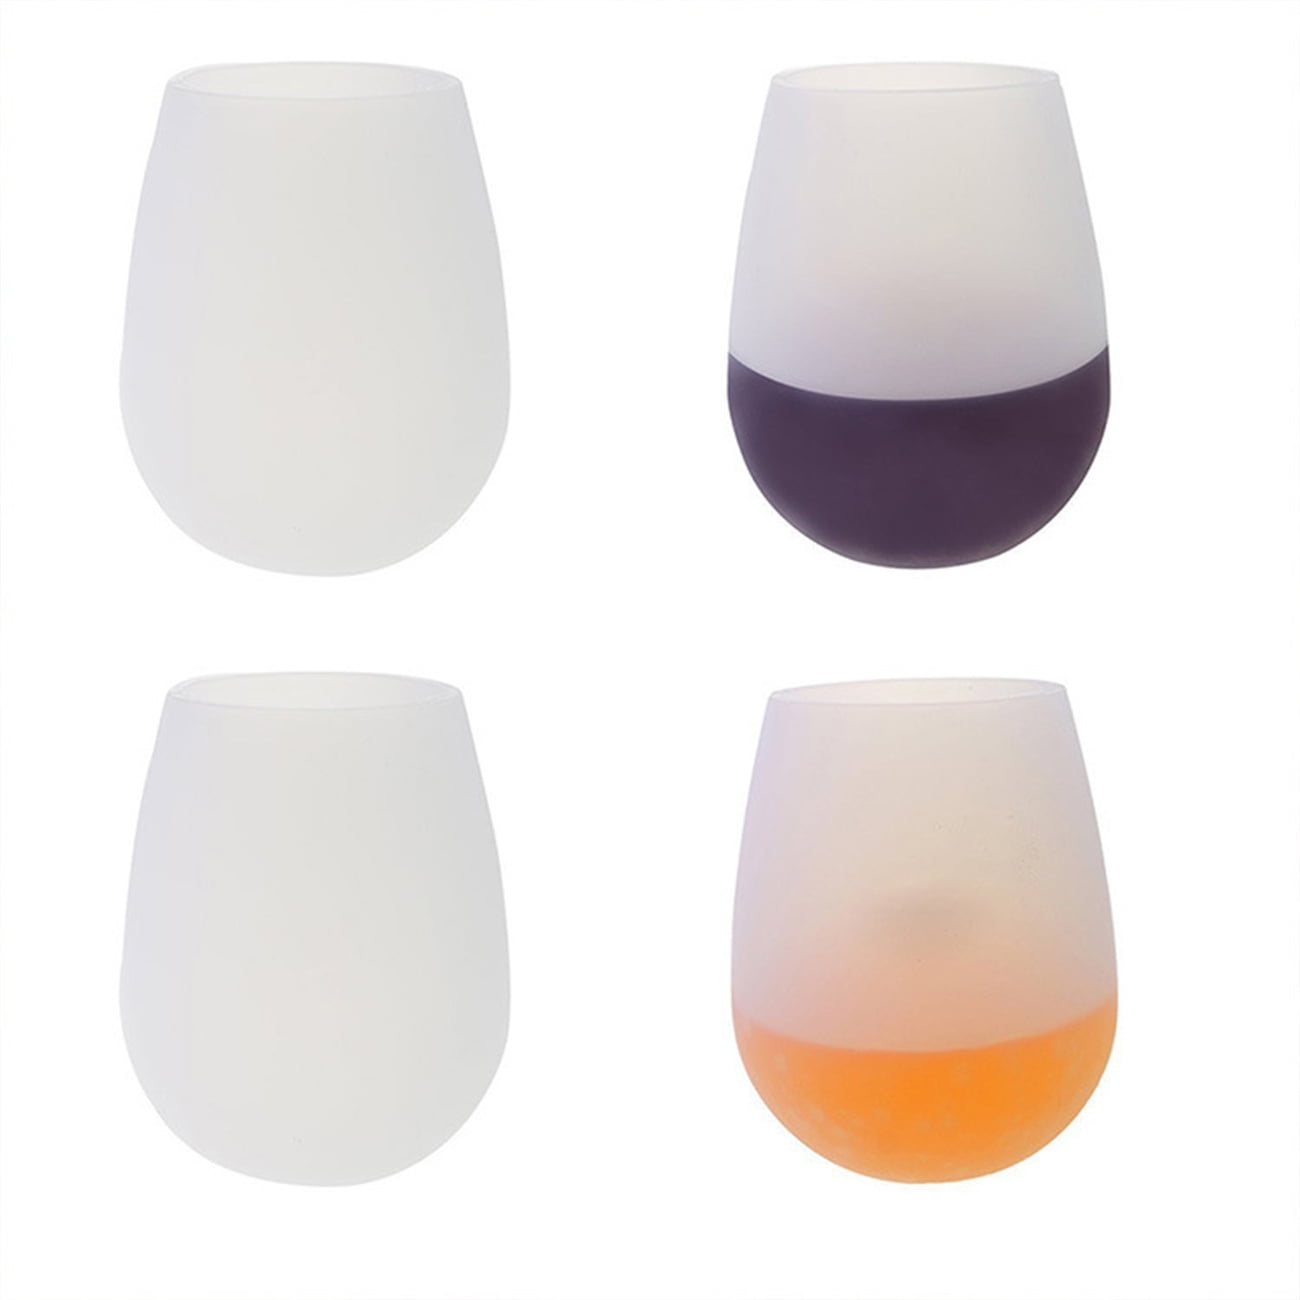 Unbreakable Silicone Wine or Kids Cup 14 oz - 4 Colors! – Piper